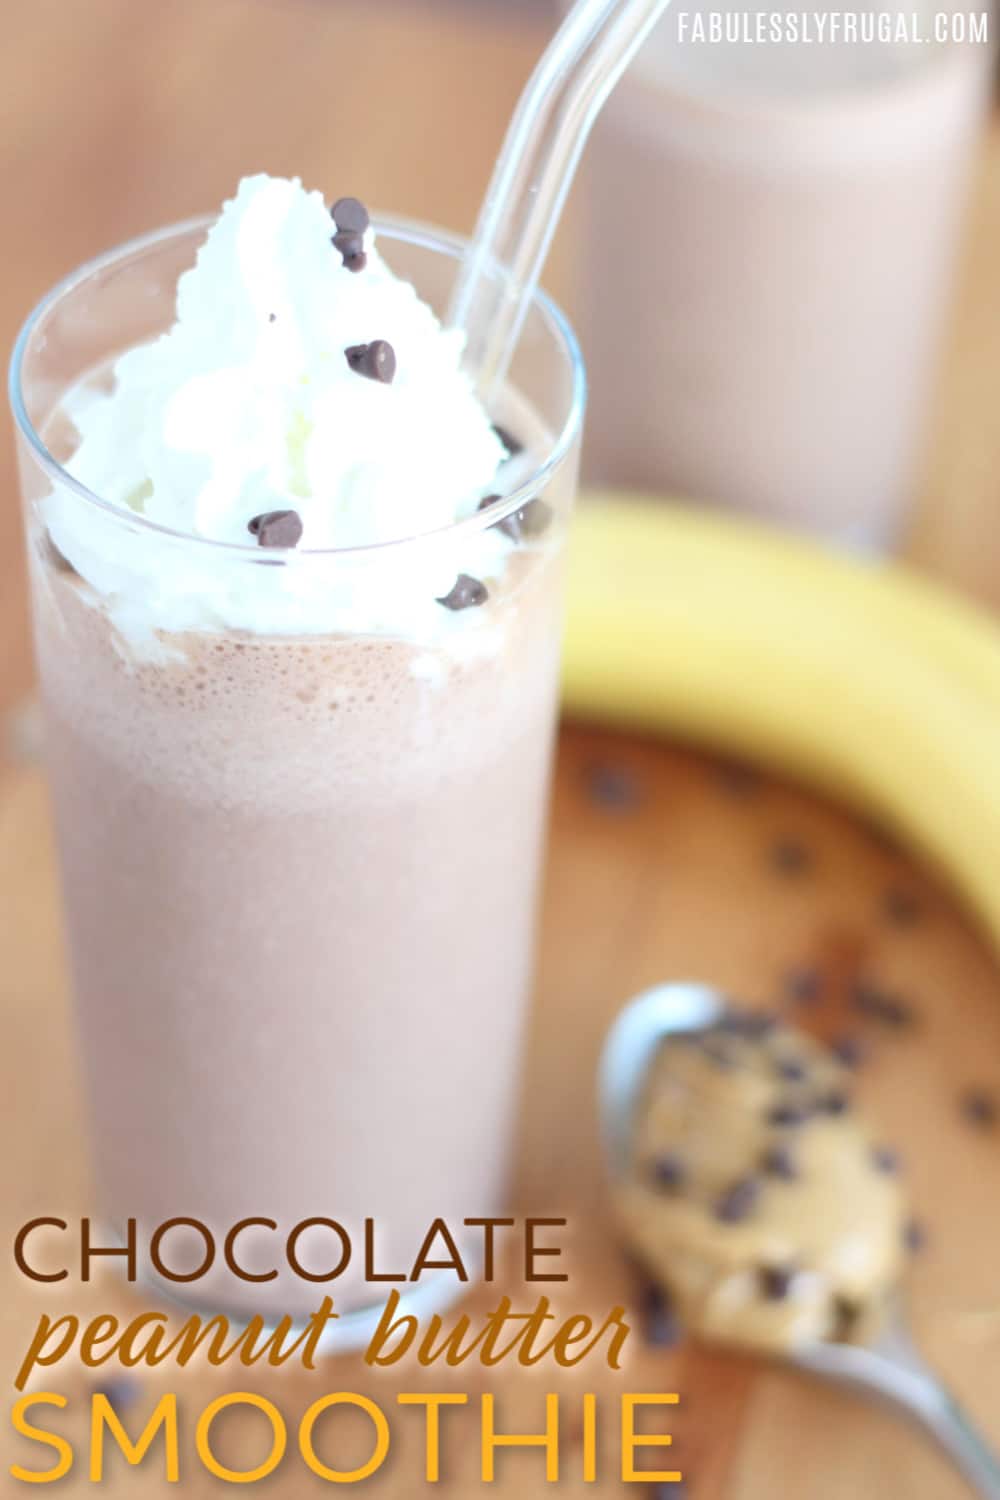 Banana chocolate chip peanut butter smoothie